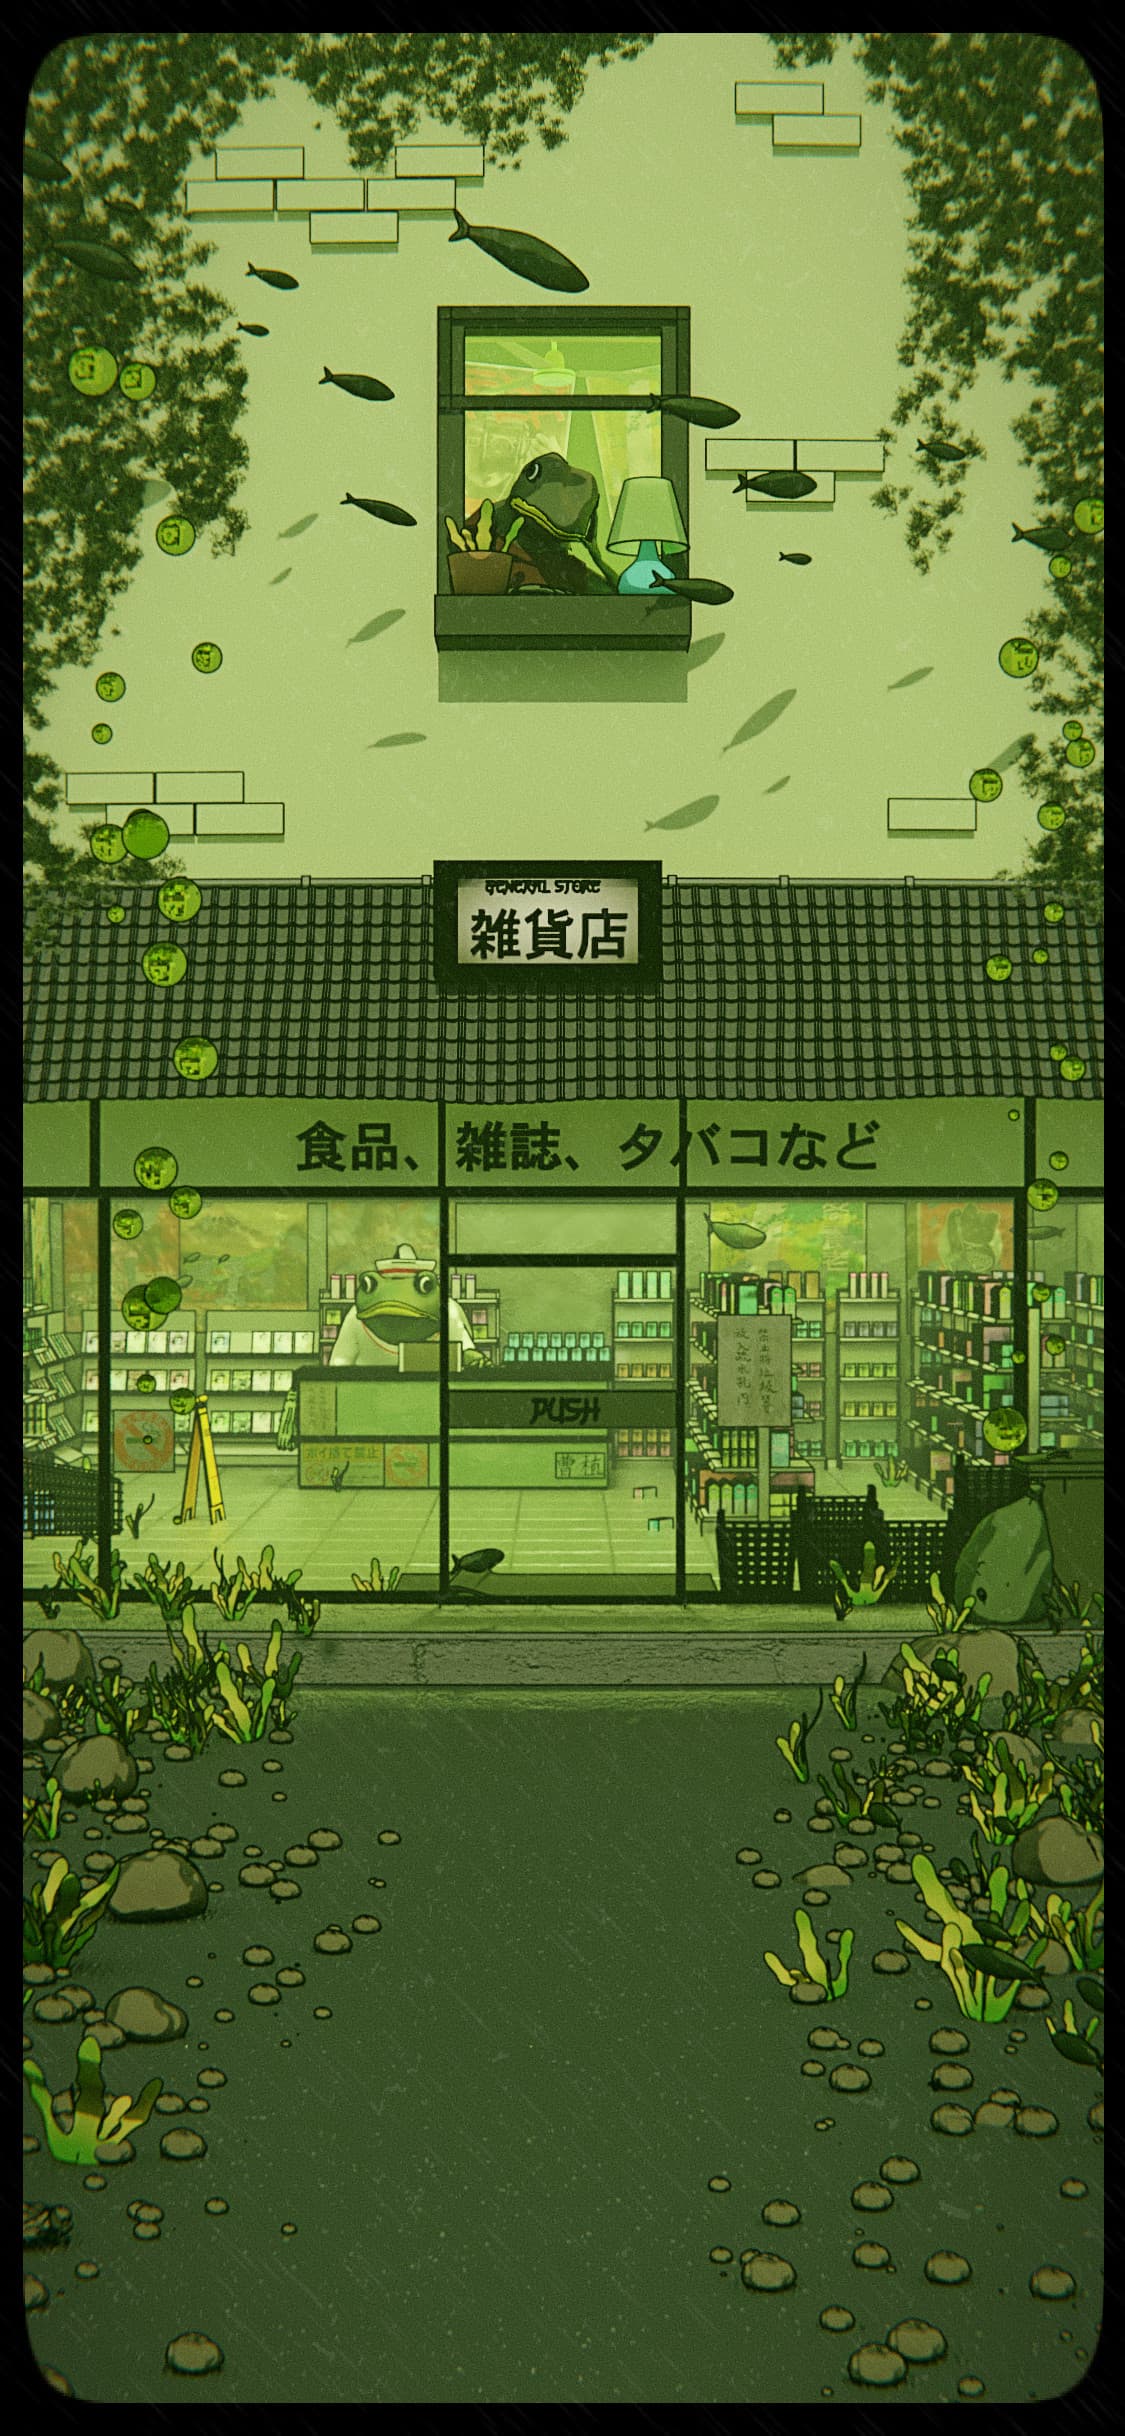 A store front is shown with a variety of items. - Underwater